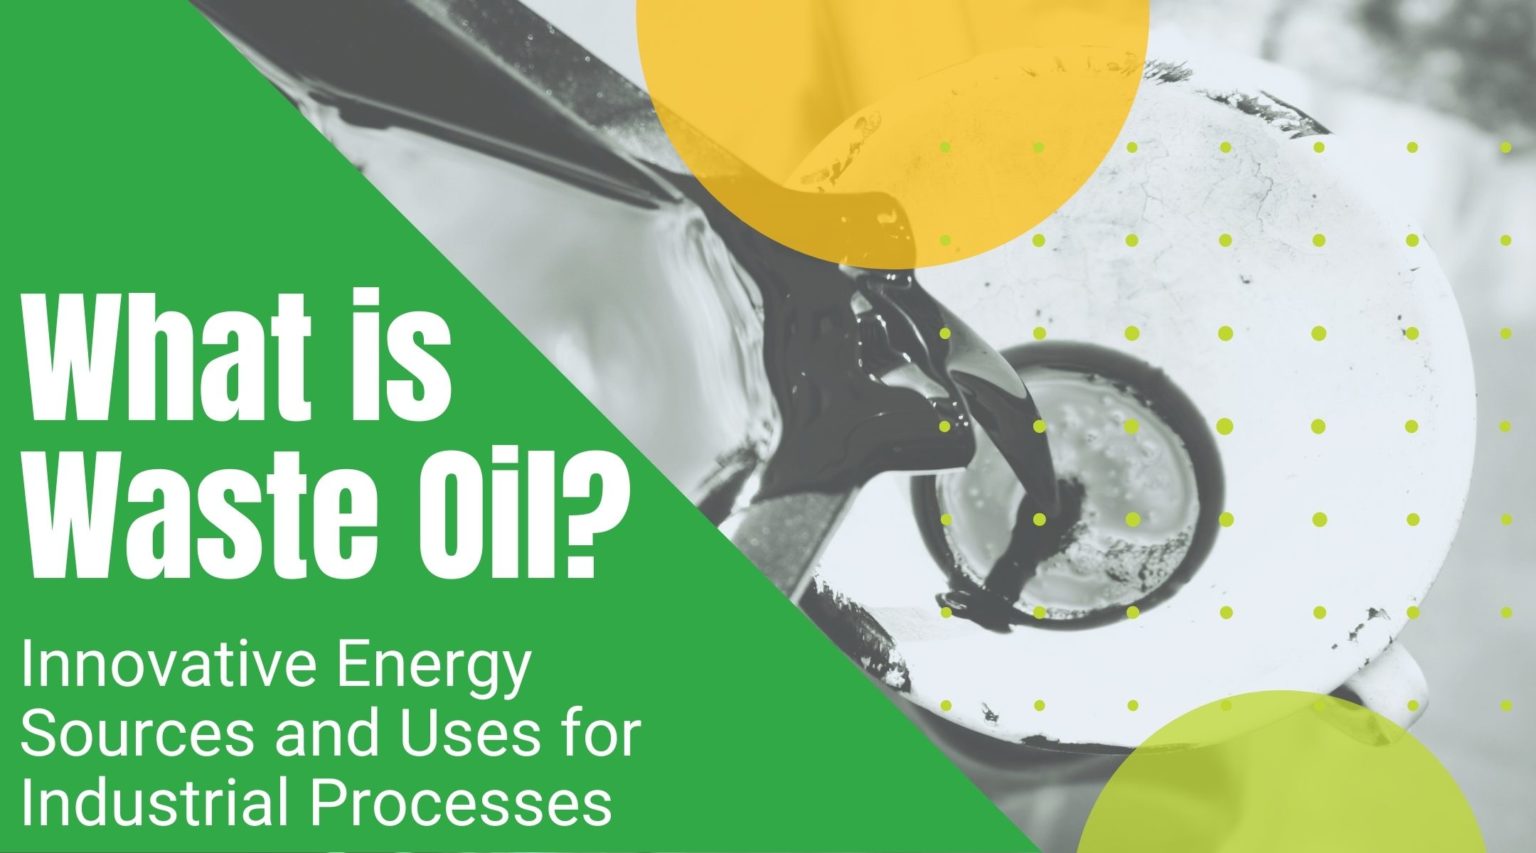 What Is Waste Oil - Innovative Energy Sources and Uses for Industrial Processes